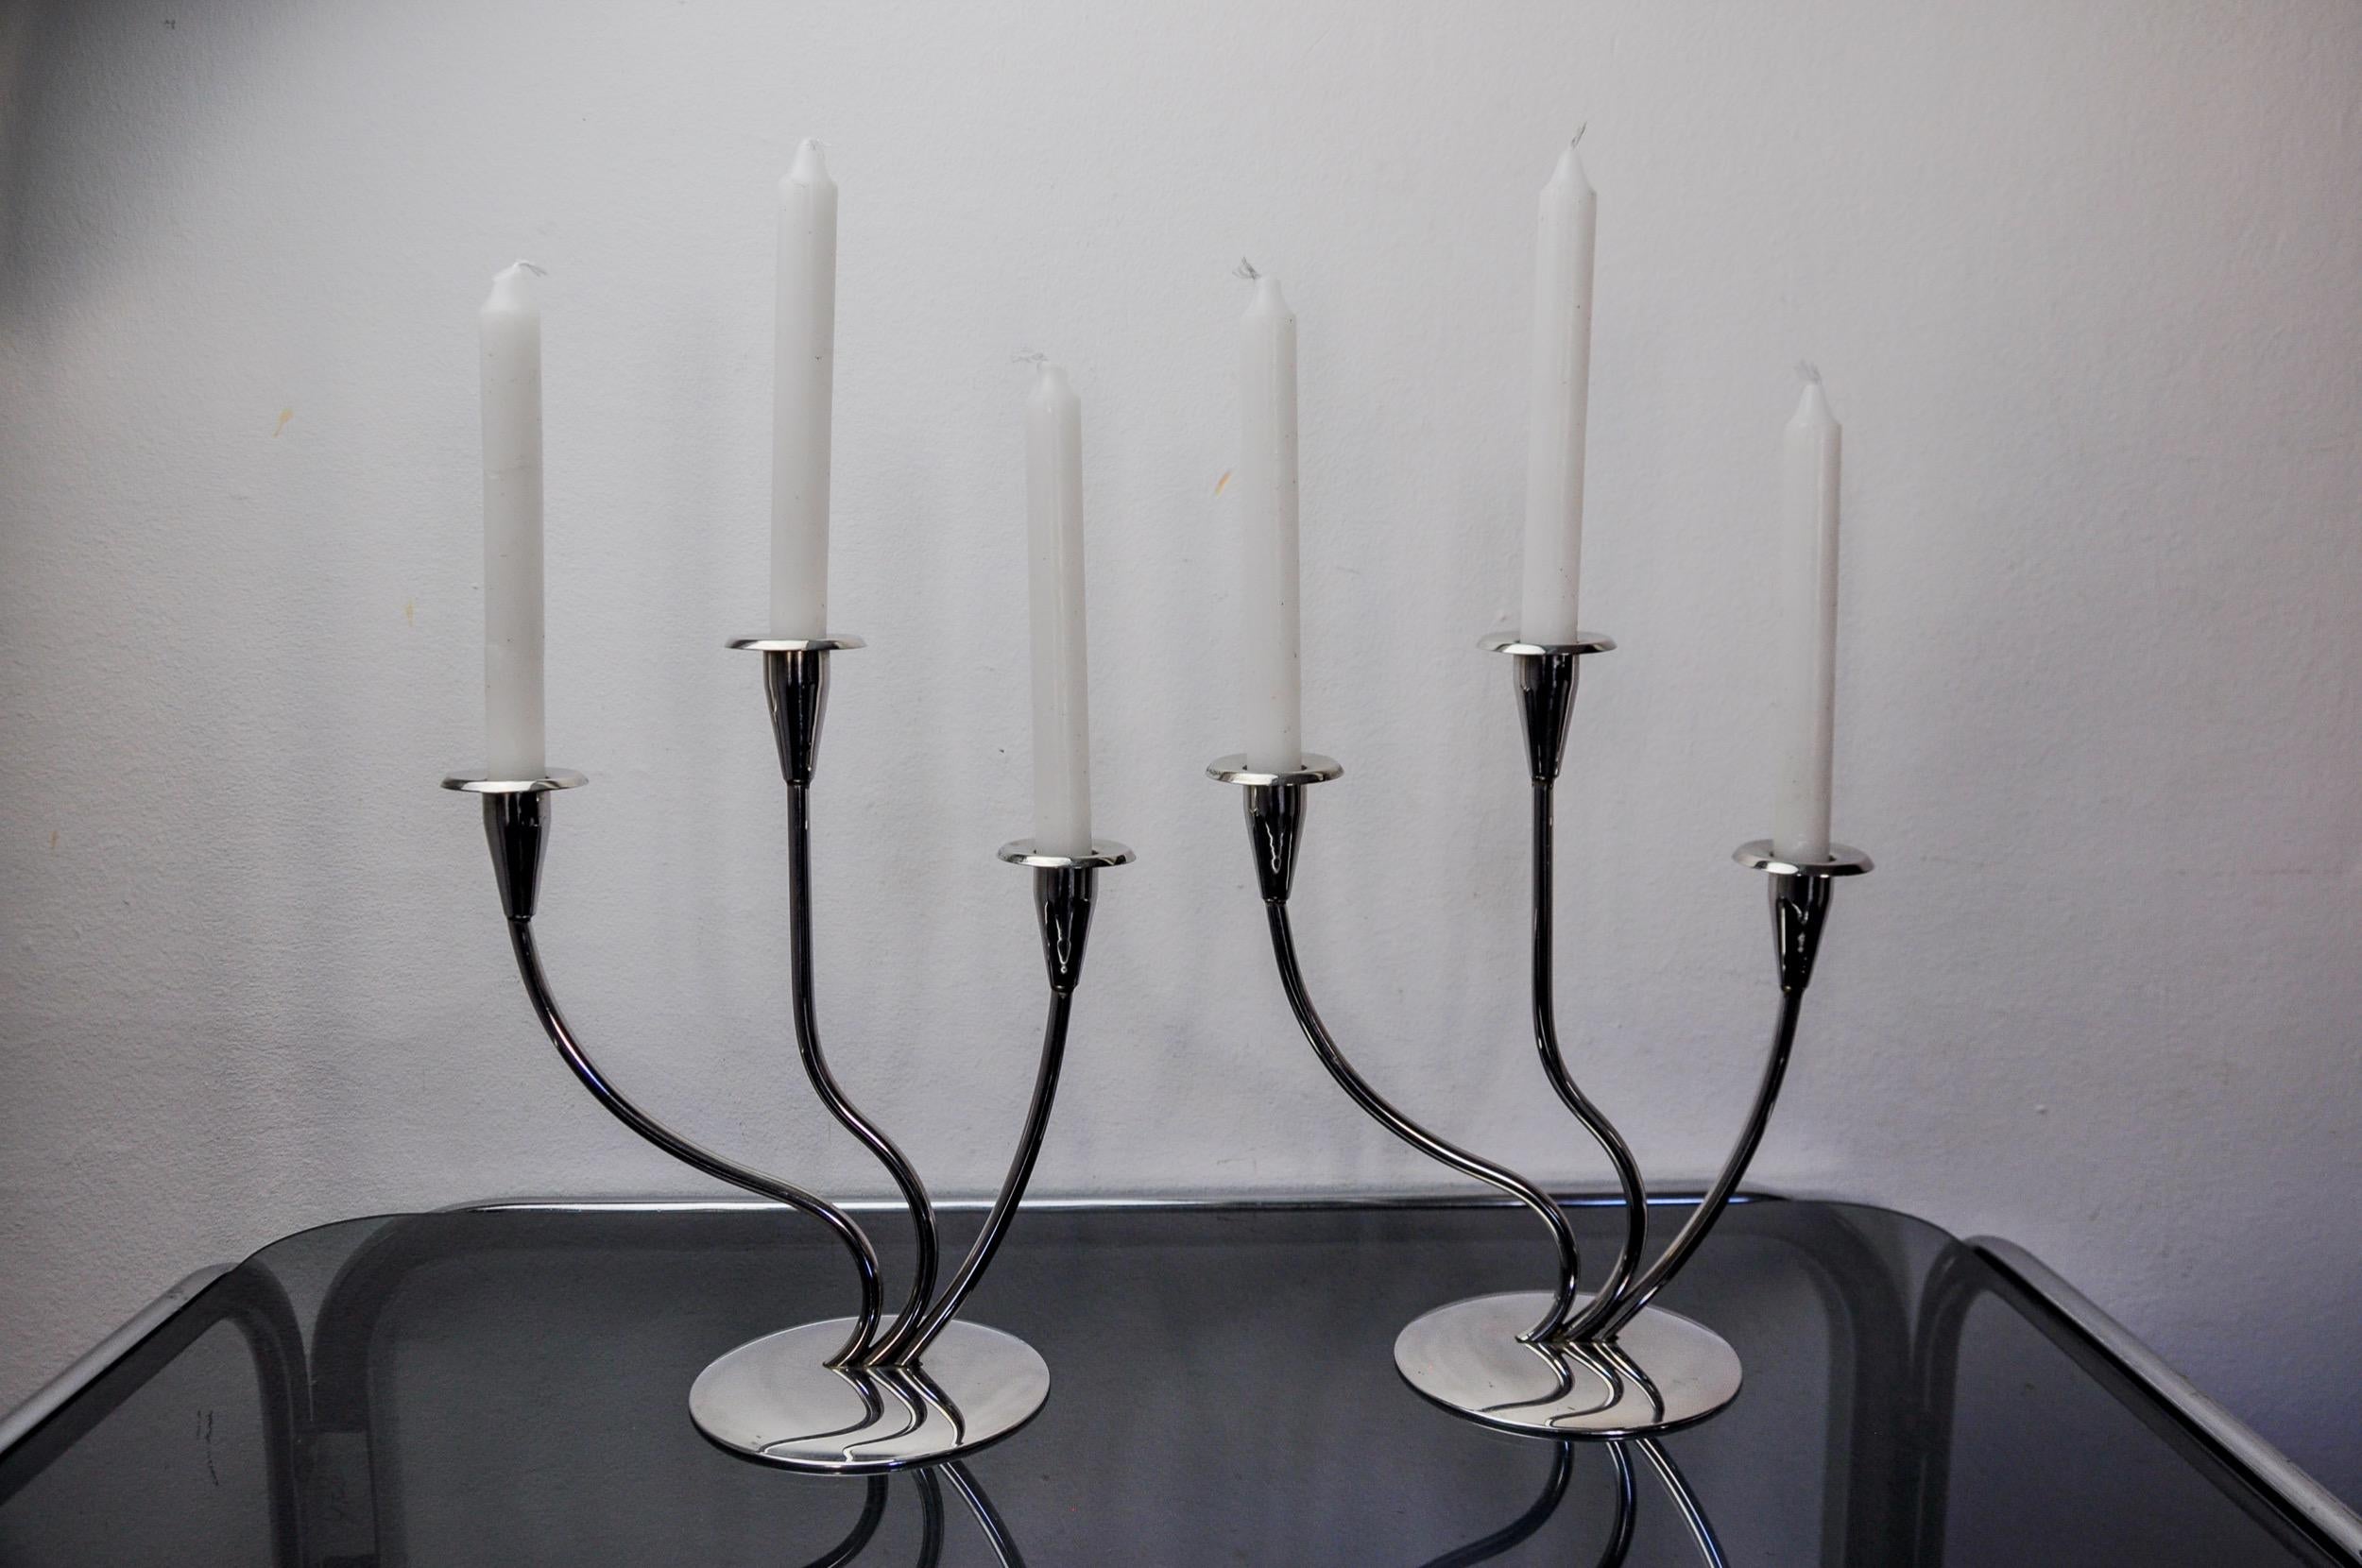 Very beautiful pair of art deco stainless steel candlesticks designed and produced in Spain in the 1970s. Structure in 18/8 stainless steel that can accommodate 3 candles. Superb designer object that will decorate your interior wonderfully. Good